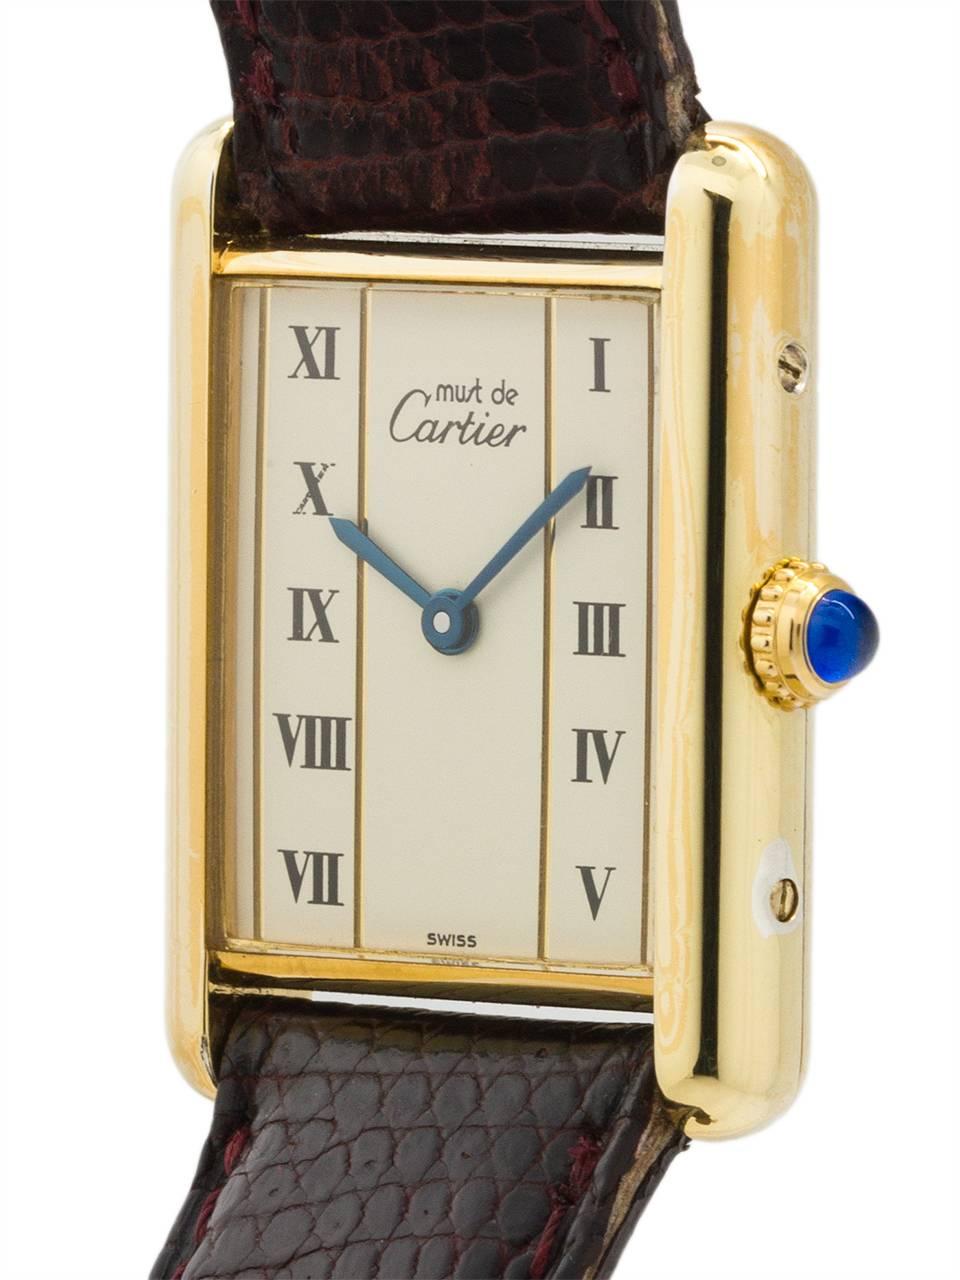 
Cartier Man’s Tank Louis circa 1990s. Featuring 24 x 30mm vermeil (20 microns gold over silver) case secured by 4 side and 4 case back screws. Featuring original, and very interesting, white dial signed Must de Cartier with painted black roman